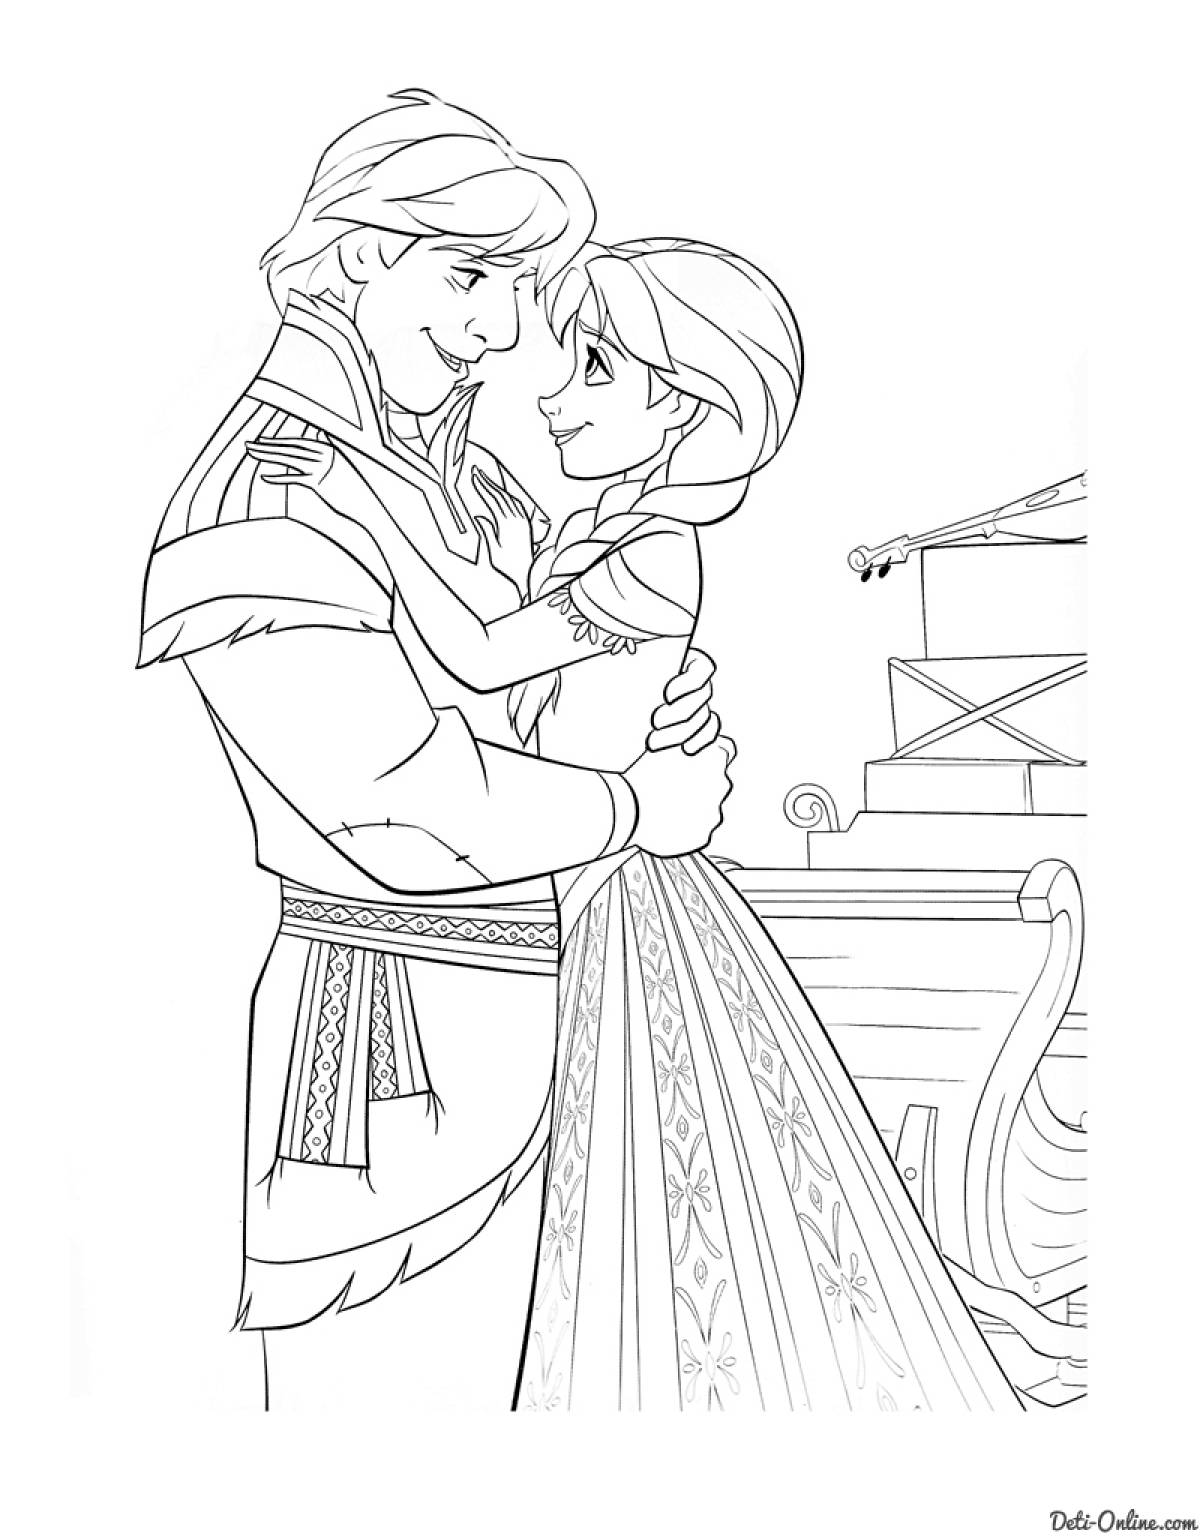 Frozen heroes coloring page